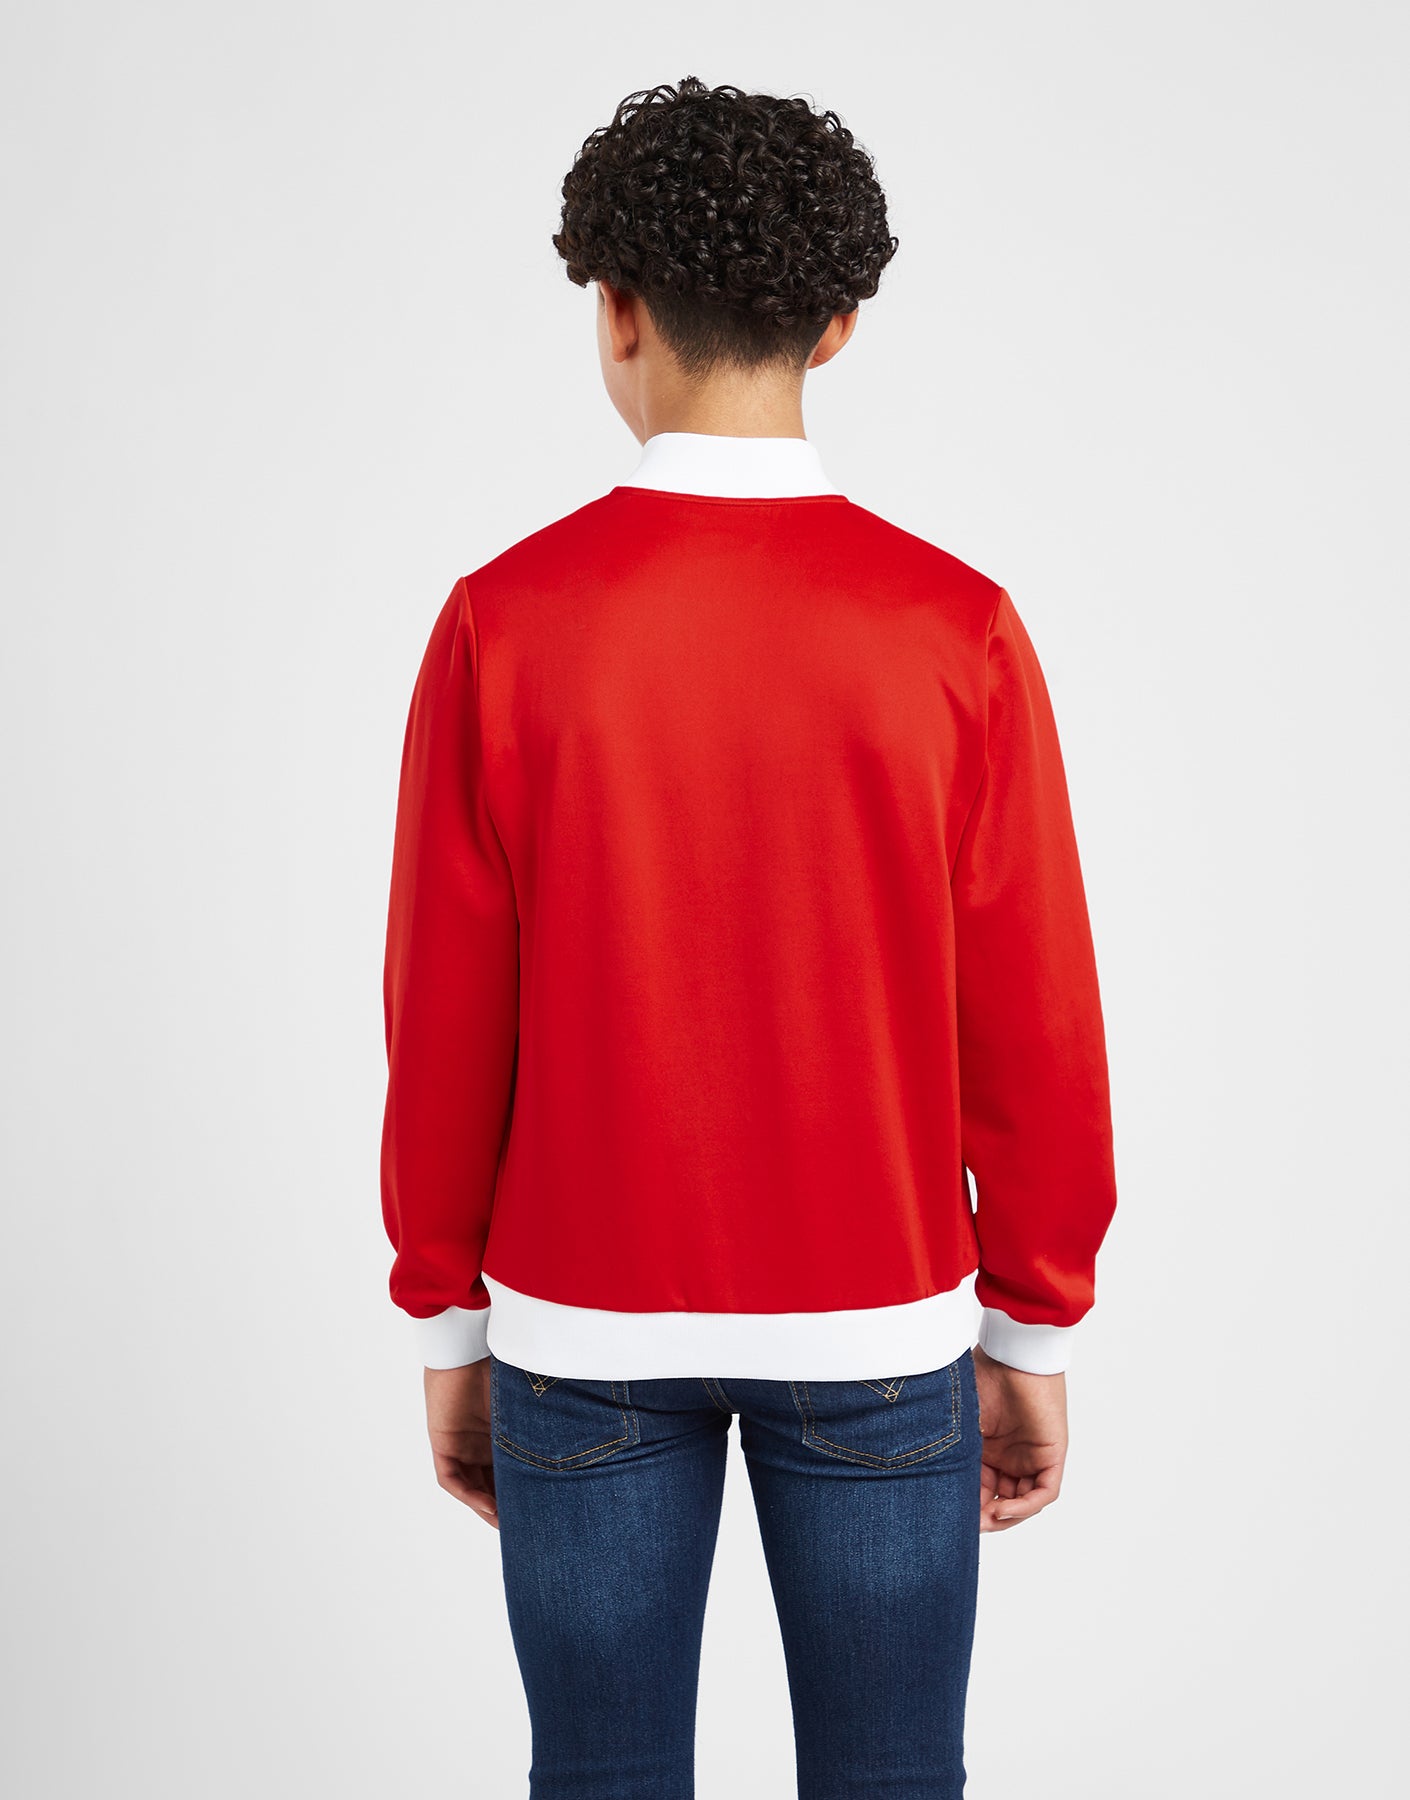 Official Team Wales Kids Retro Track Top - Red